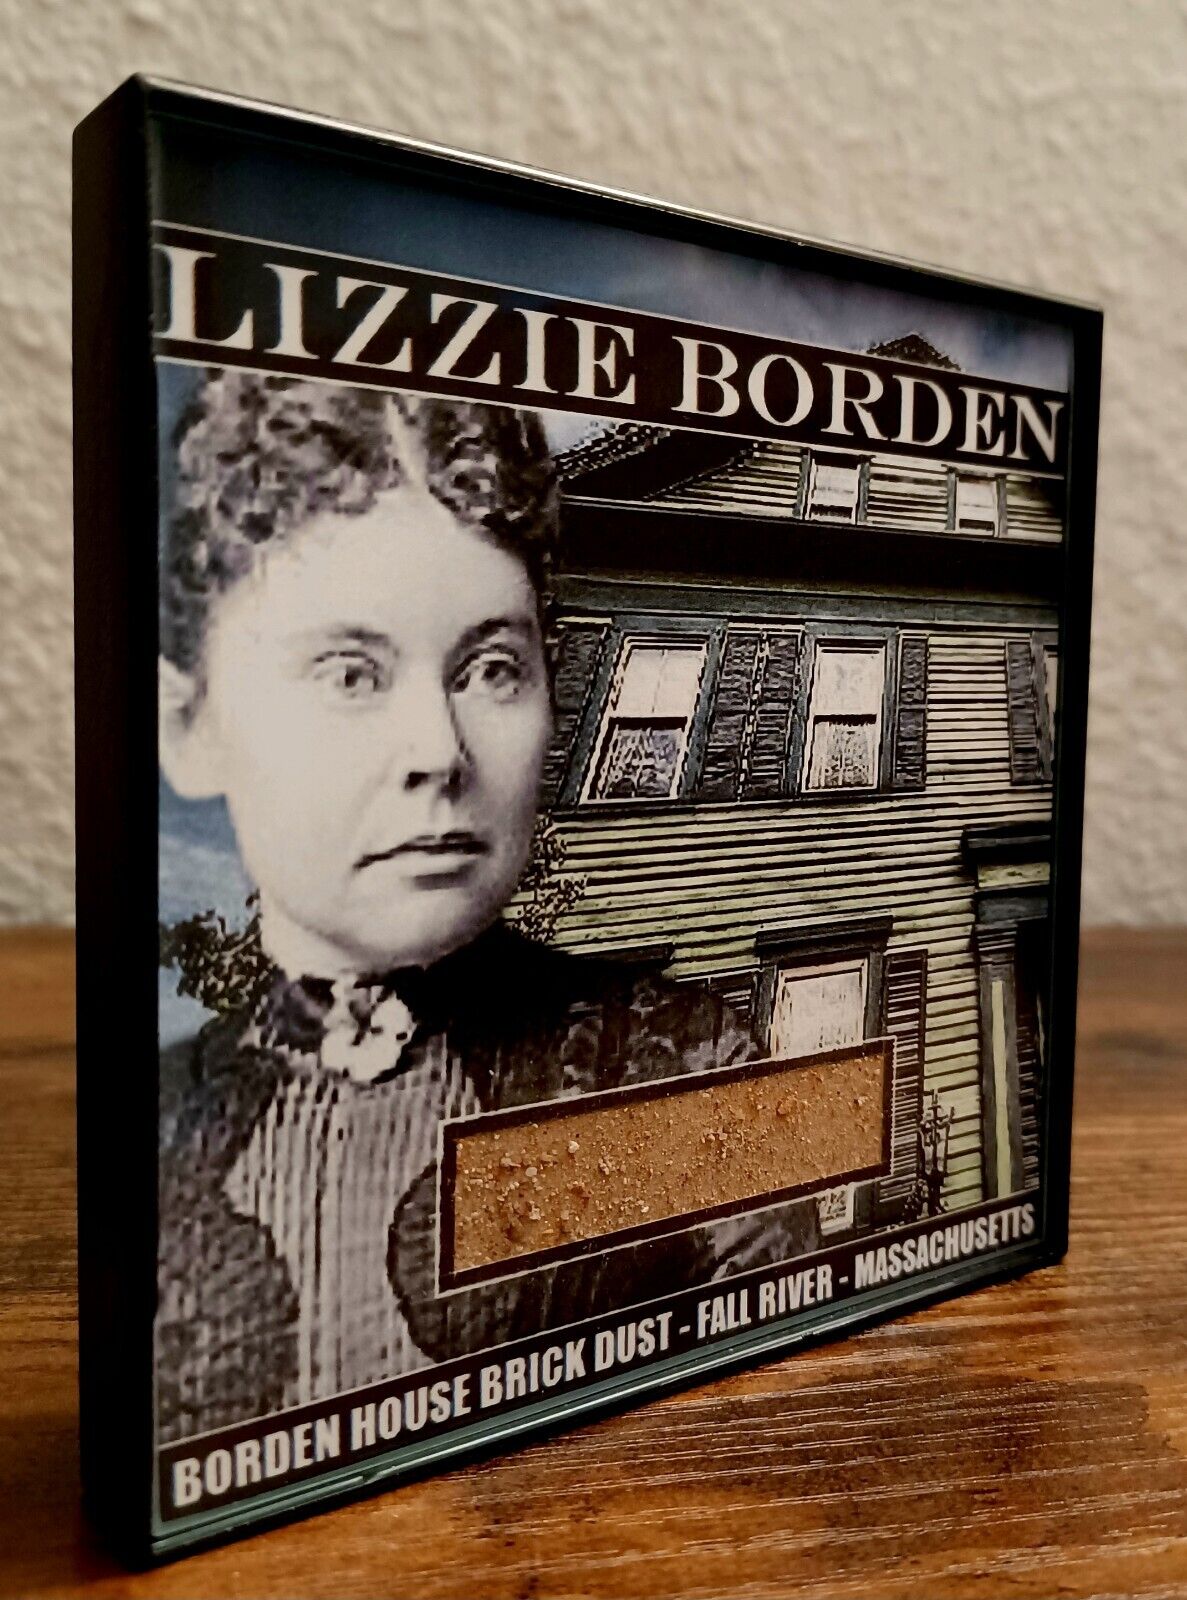 Lizzie Borden House Brick Fragments Framed Display Location Relic Piece 